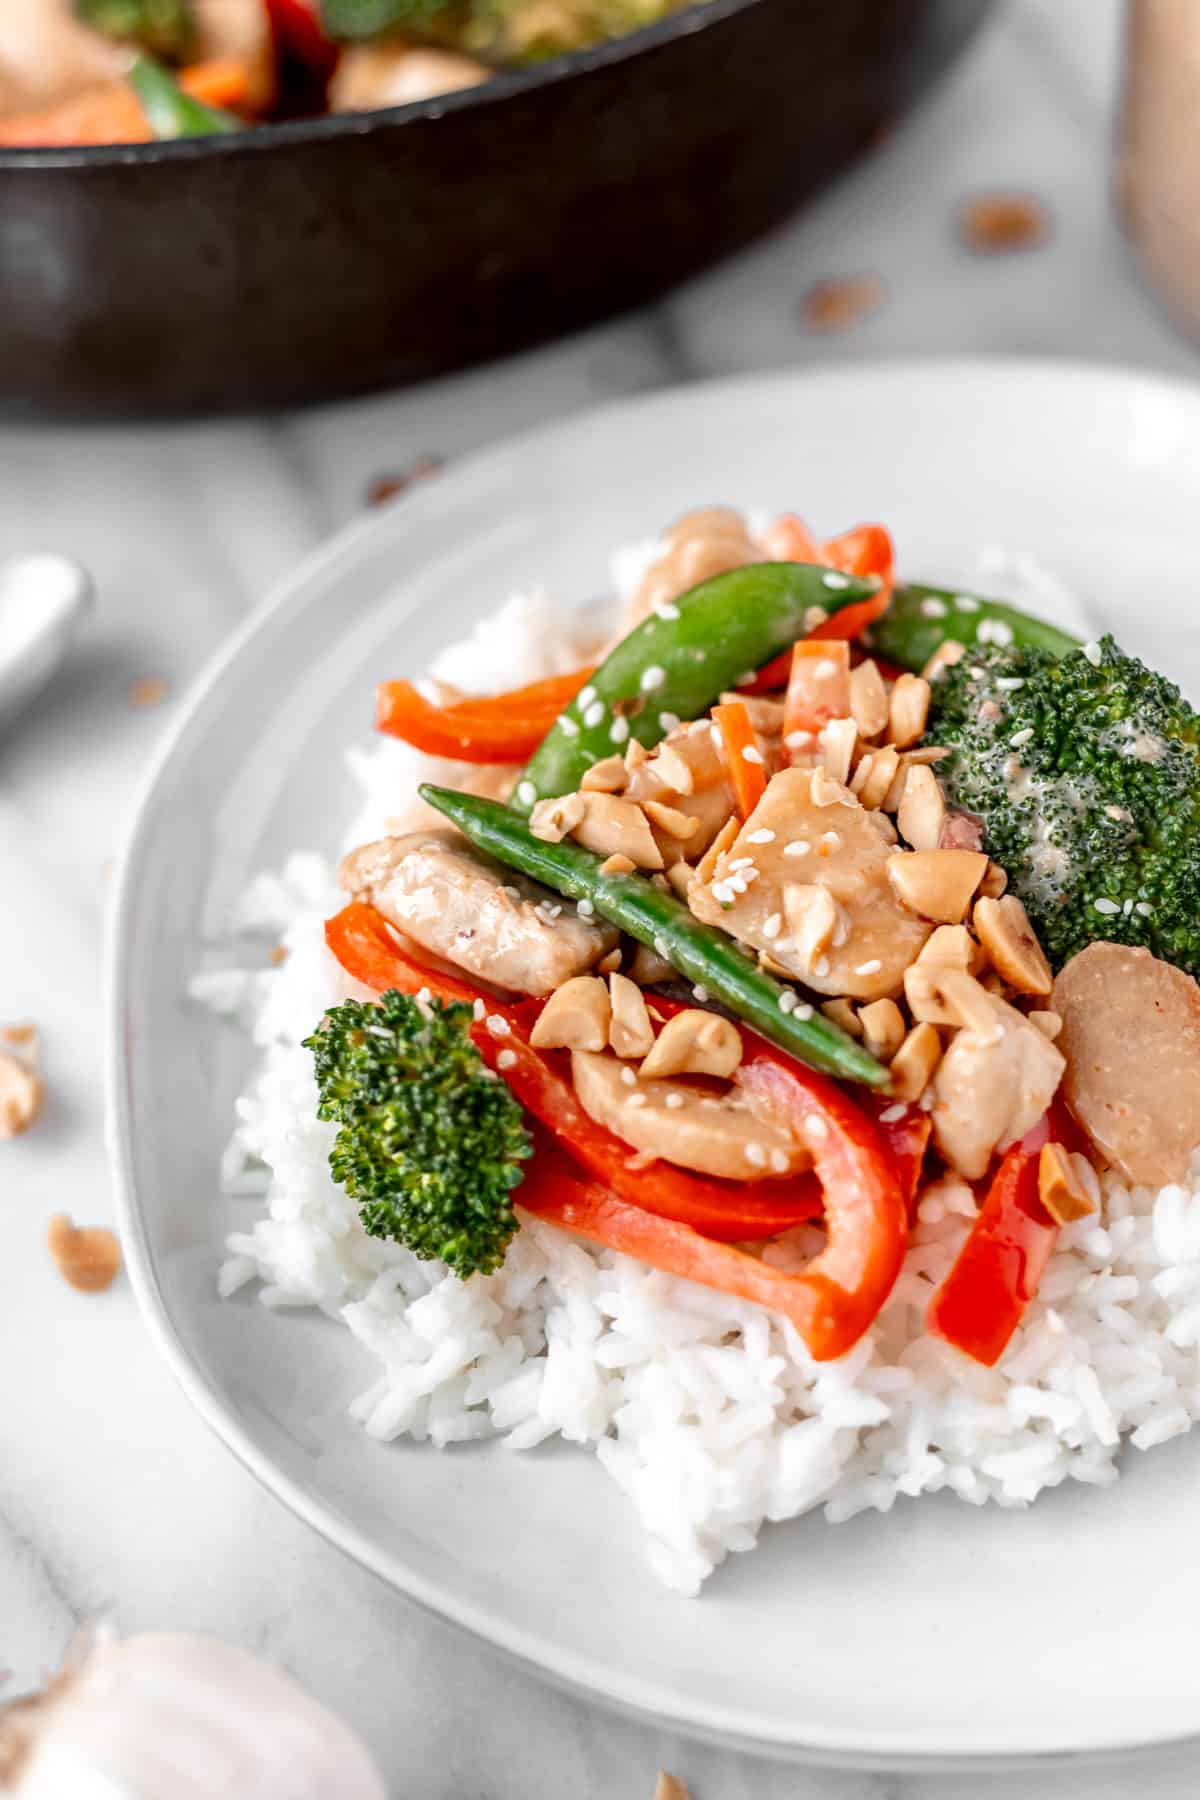 Close up of a serving of chicken peanut stir fry on rice on a white plate with a skillet partially showing in the background.